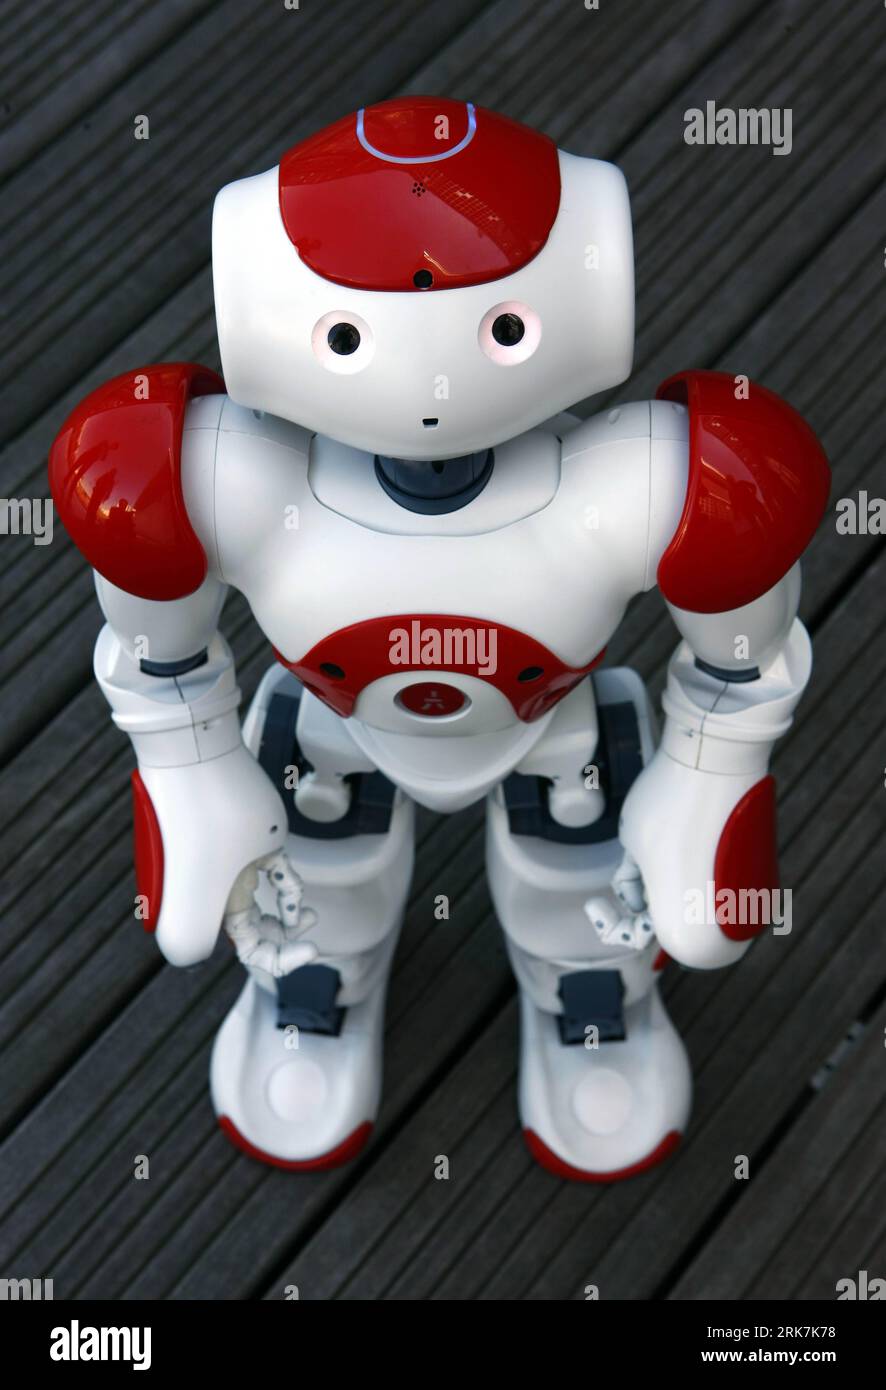 Bildnummer: 53923450  Datum: 06.04.2010  Copyright: imago/Xinhua (100407) -- PARIS, April 7, 2010 (Xinhua) -- A robot named Nao and developed by France s Aldebaran company is displayed in Paris April 6, 2010. The robot can speak fluent English, French and Chinese. It will be displayed at the Shanghai World Expo as the mascot of French Pavilion. (Xinhua/Zhang Yuwei) (dyw) (4)FRANCE-PARIS-ROBOT-SHANGHAI WORLD EXPO PUBLICATIONxNOTxINxCHN Gesellschaft Wirtschaft Weltausstellung Roboter kbdig xub 2010 hoch premiumd xint     Bildnummer 53923450 Date 06 04 2010 Copyright Imago XINHUA  Paris April 7 2 Stock Photo